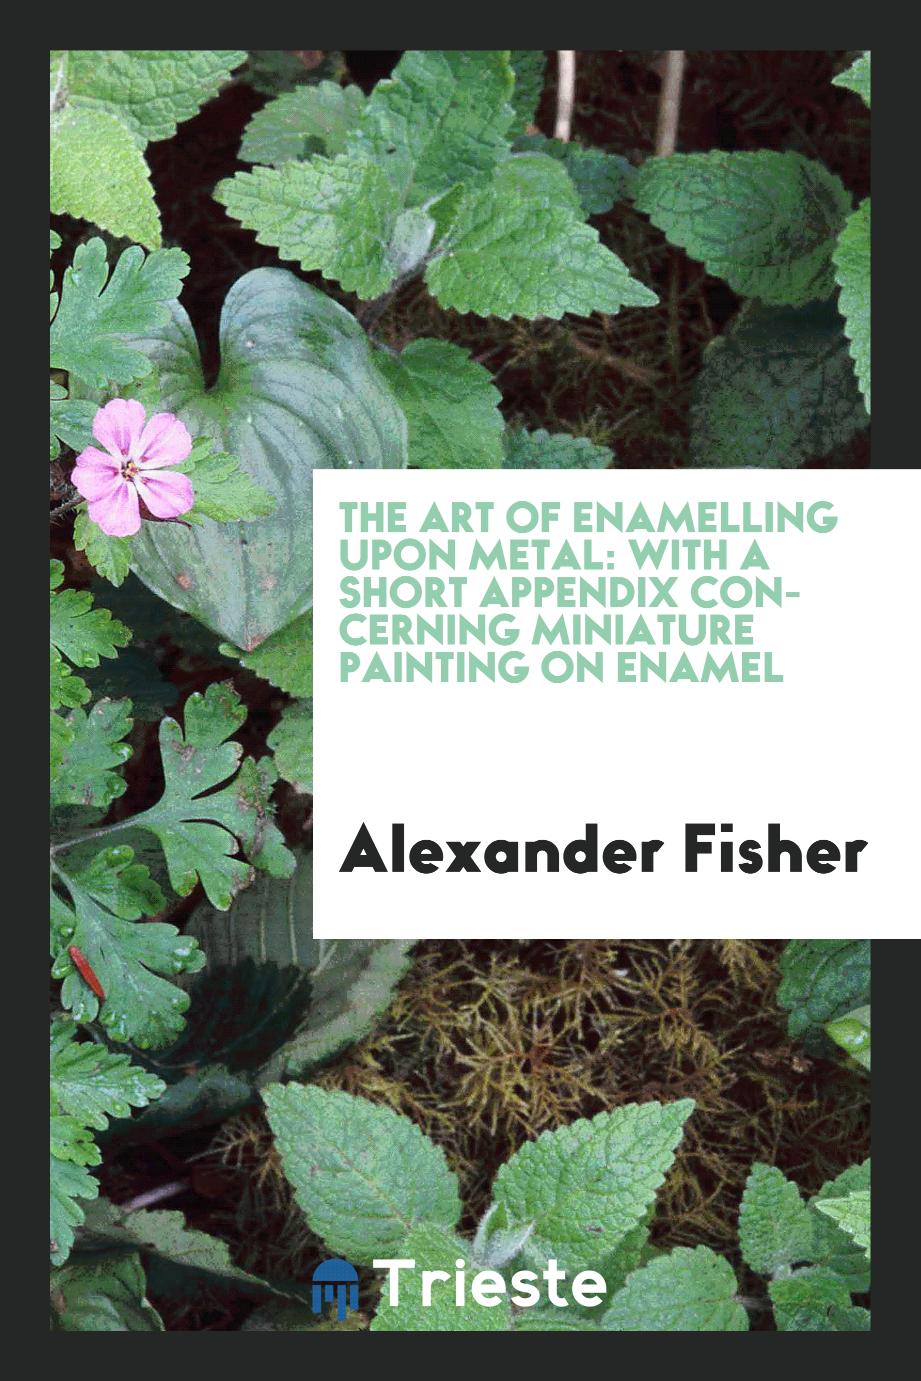 Alexander Fisher - The art of enamelling upon metal: with a short appendix concerning miniature painting on enamel